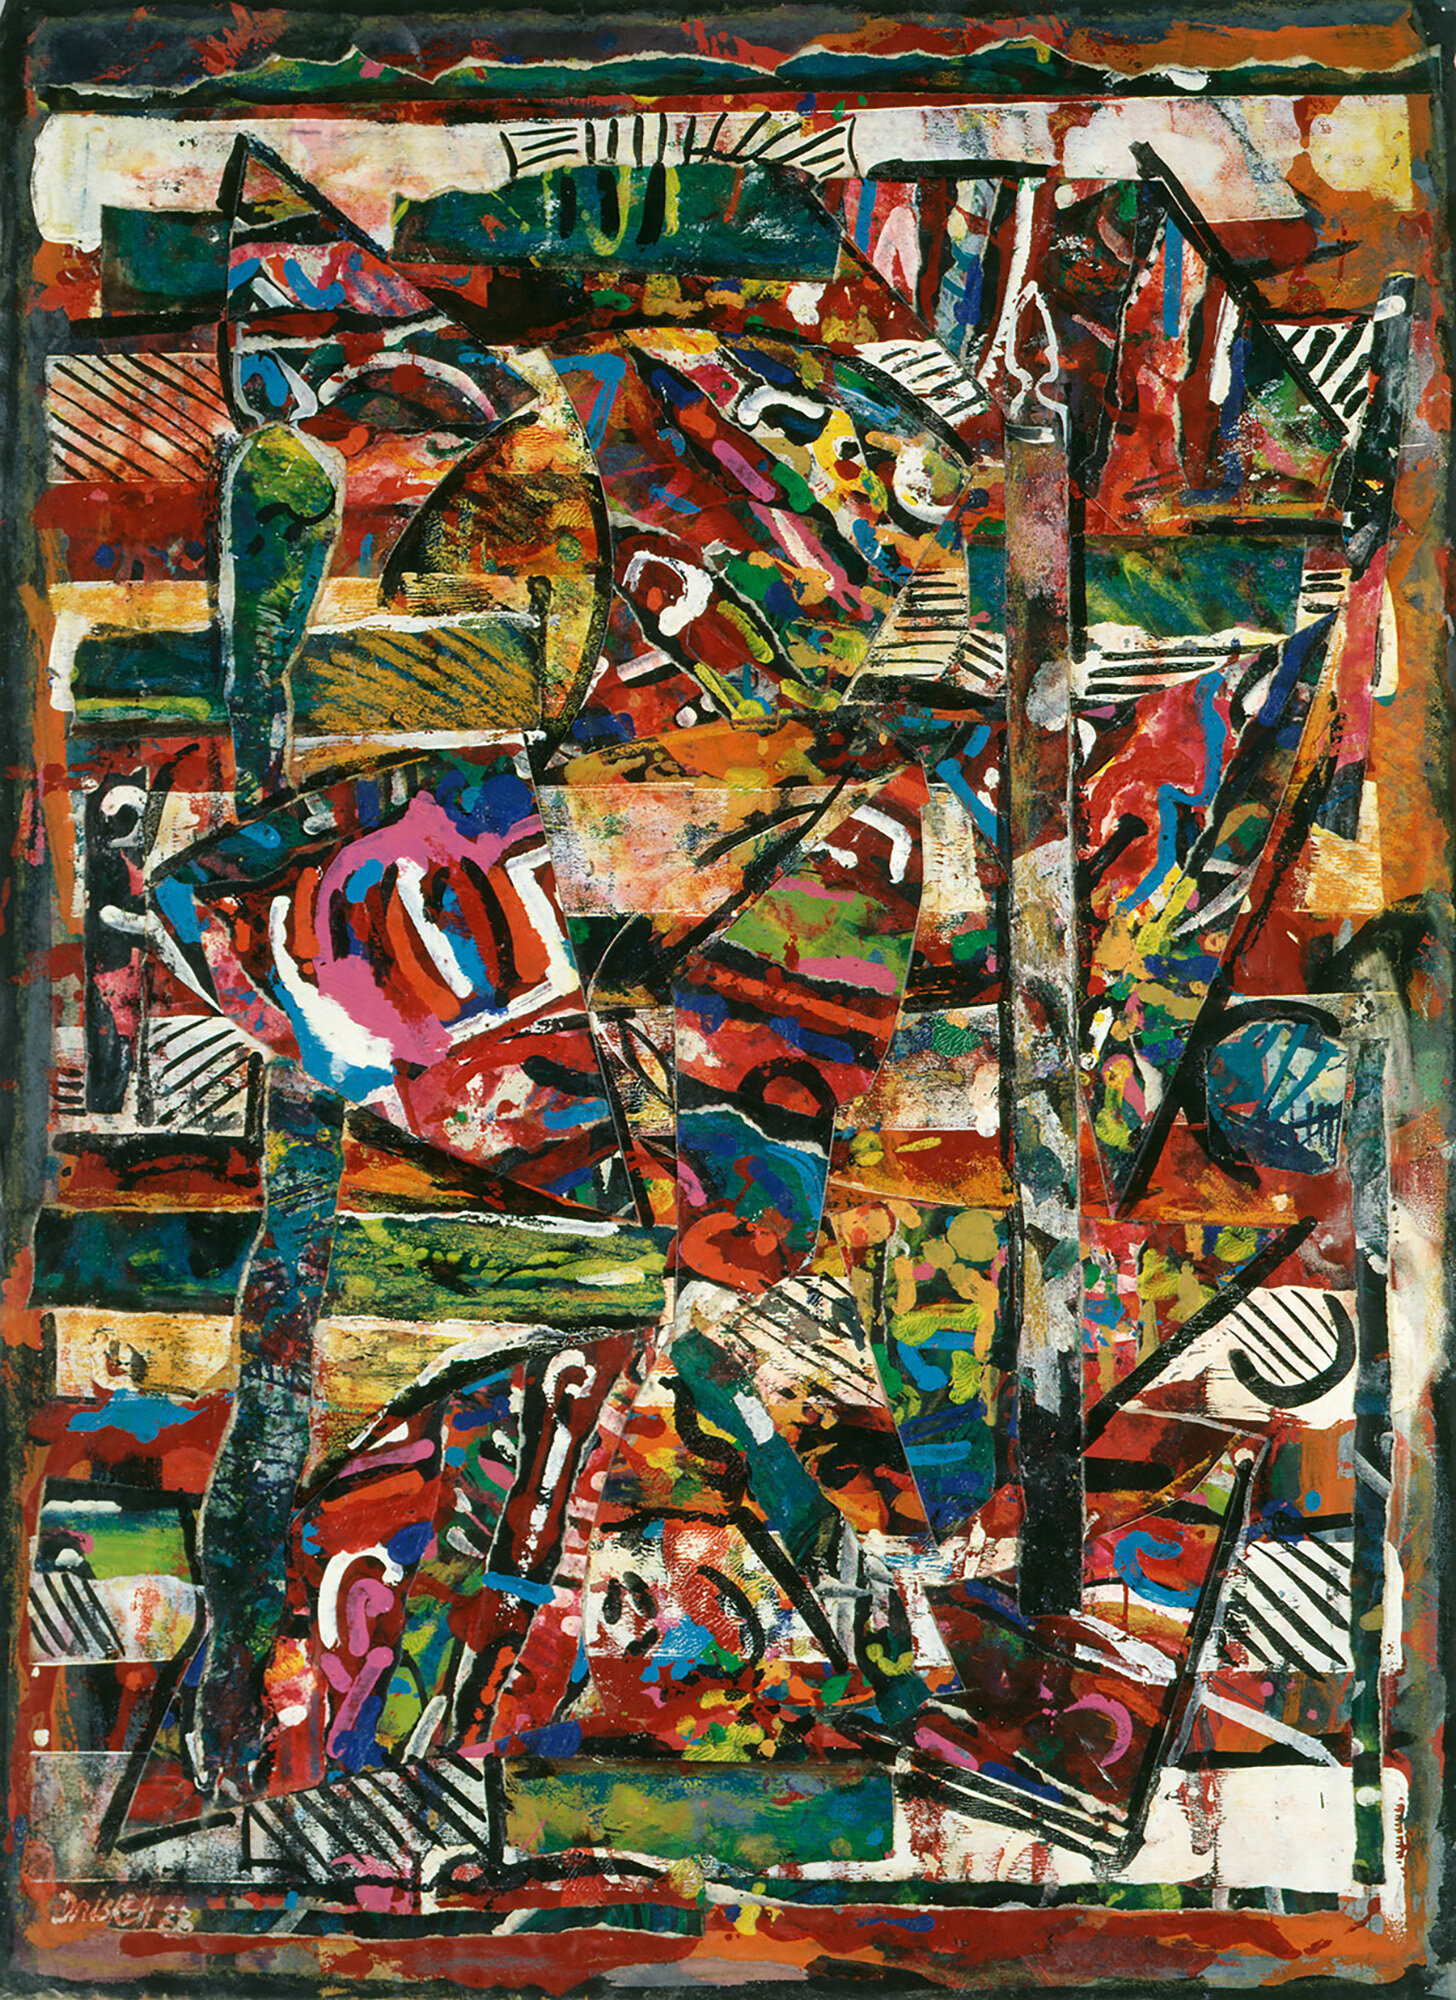  David C. Driskell (United States, 1931–2020),  Shaker Chair and Quilt , 1988, encaustic and collage on paper, 31 3/8 x 22 5/8 inches. Bowdoin College Museum of Art, Brunswick, Maine. Museum Purchase, George Otis Hamlin Fund, 1990.2. © Estate of Davi